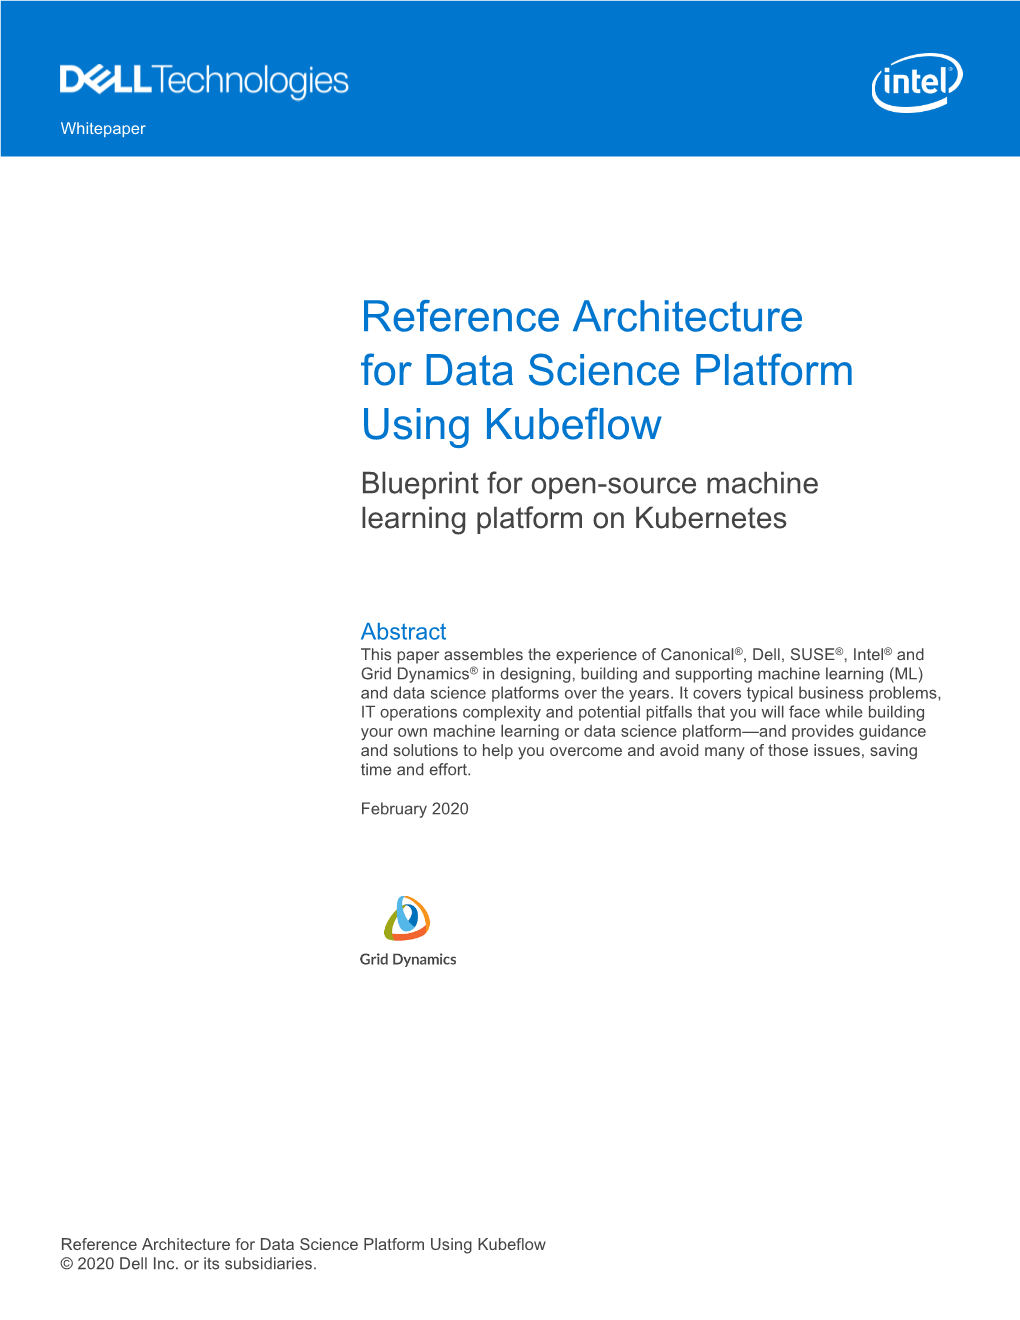 Reference Architecture for Data Science Platform Using Kubeflow Blueprint for Open-Source Machine Learning Platform on Kubernetes